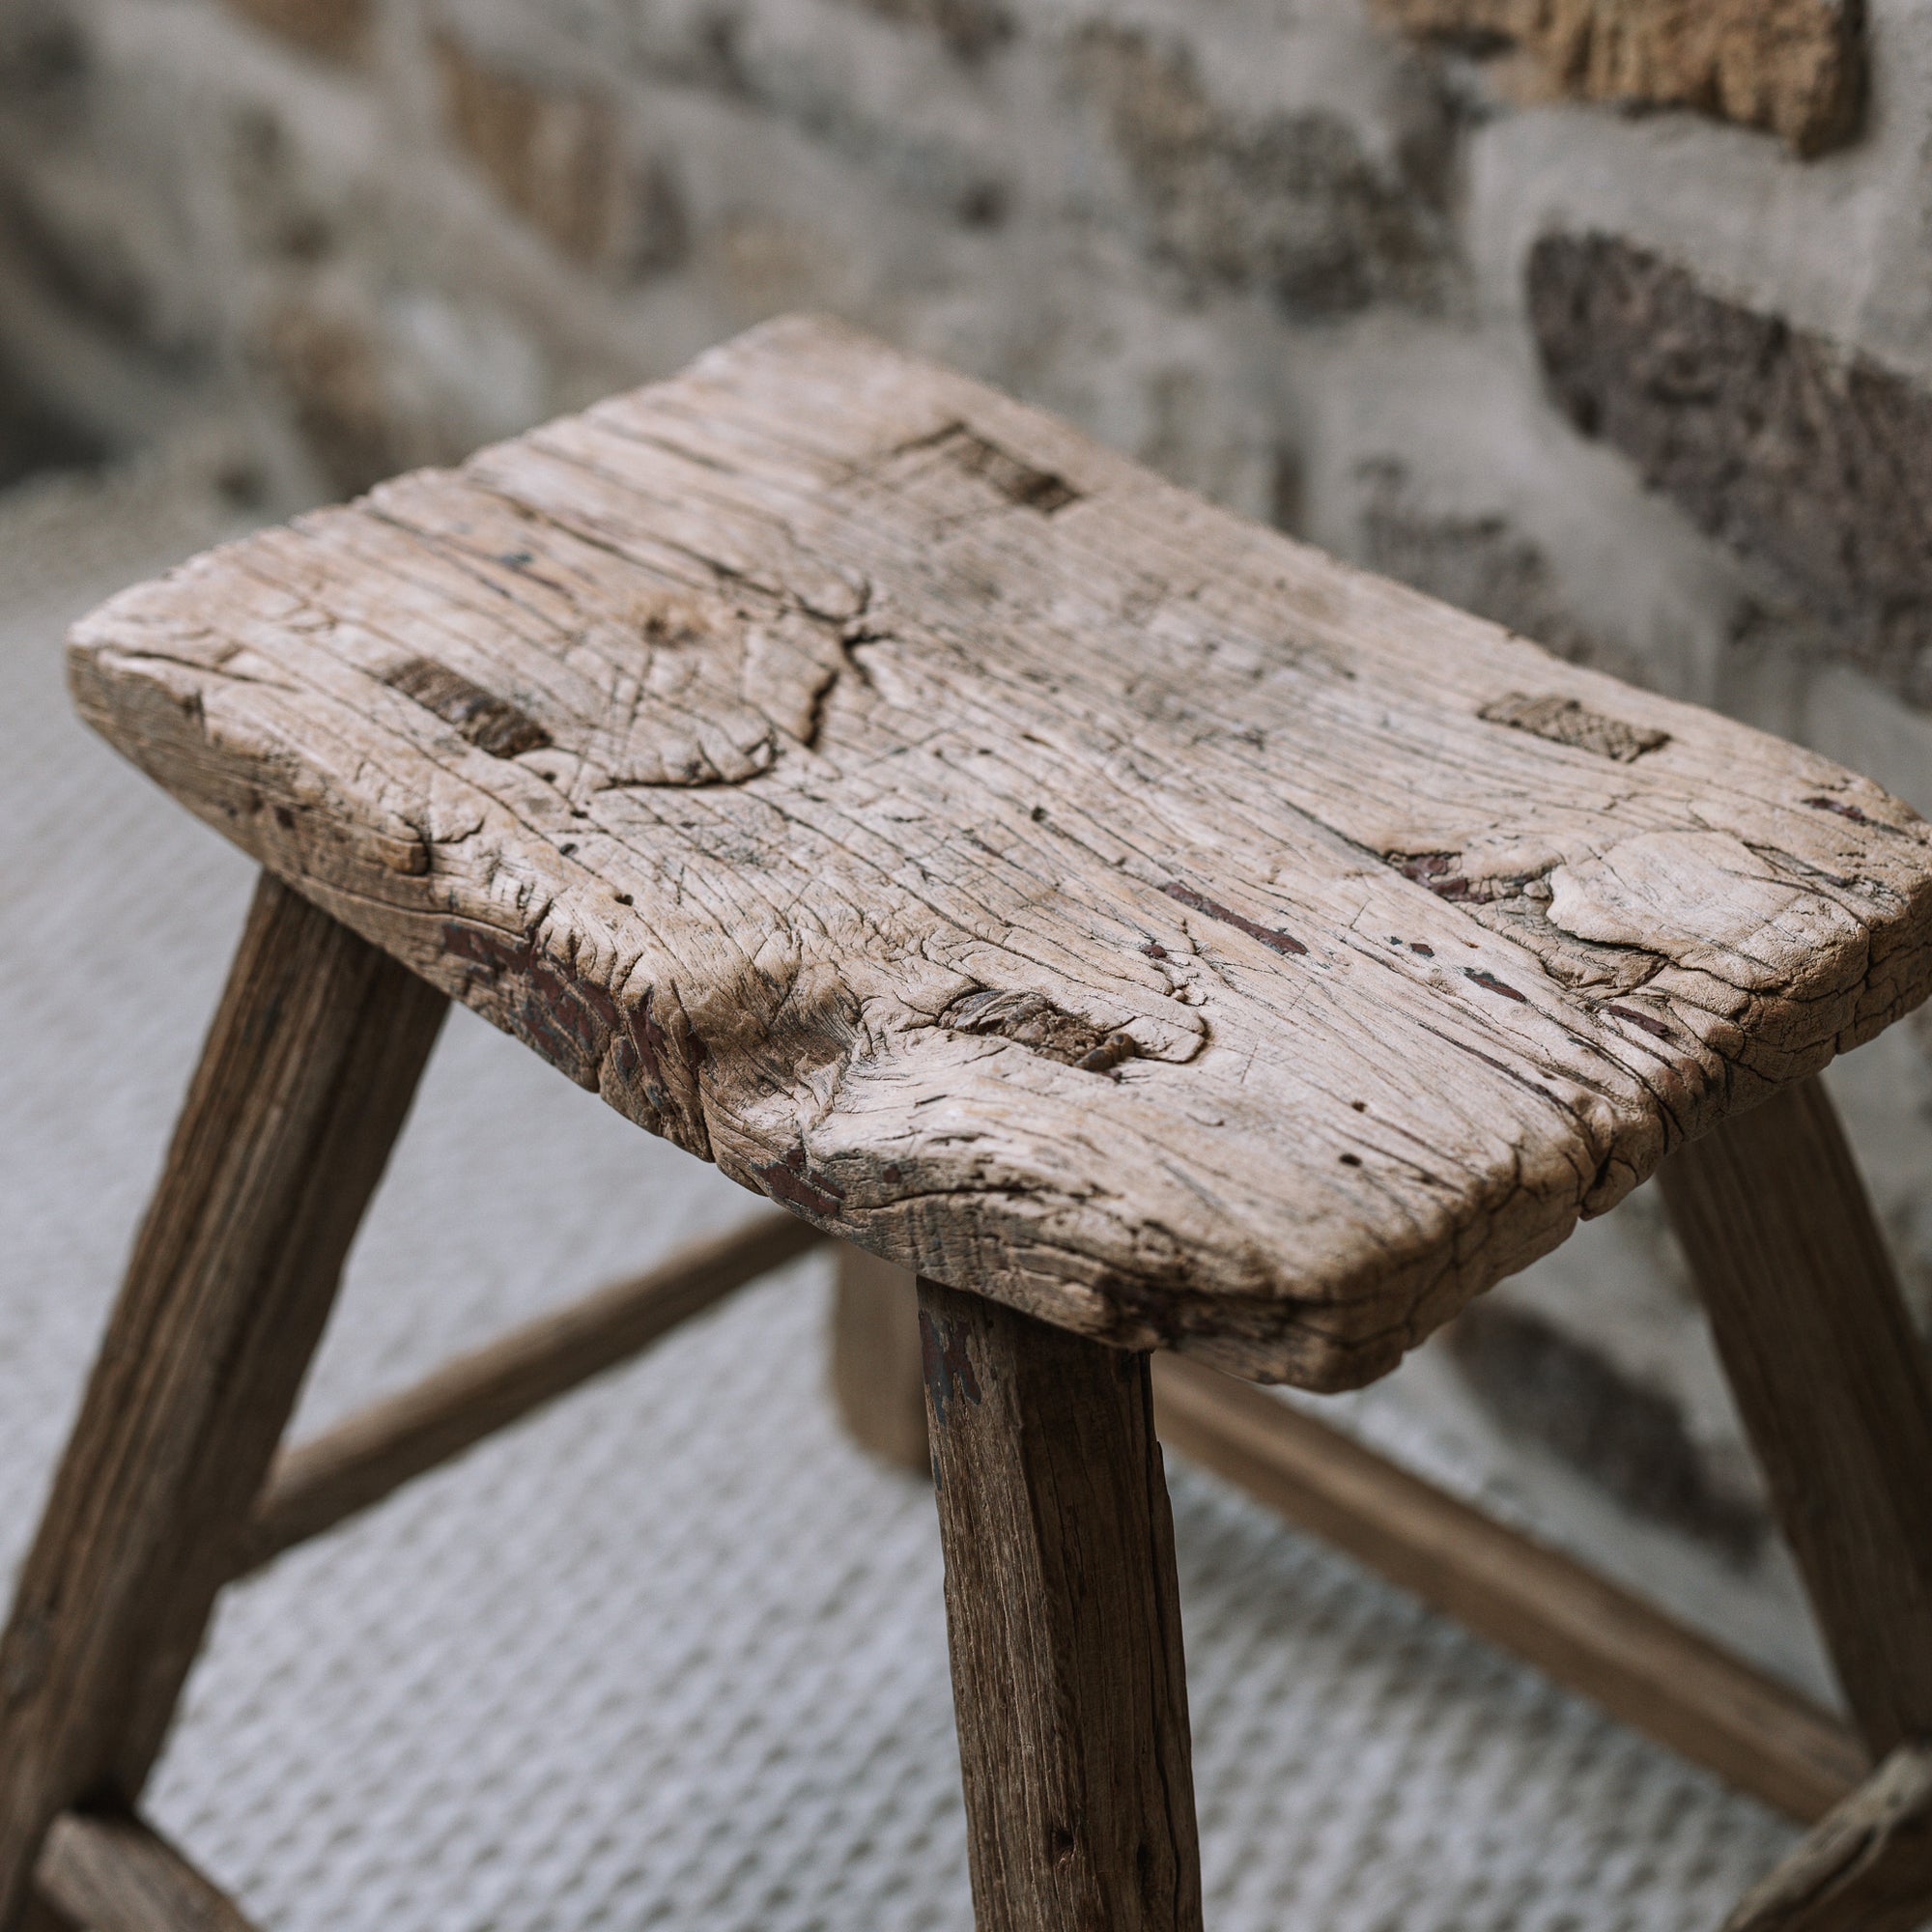 A reclaimed style wooden stool against a stone wall.